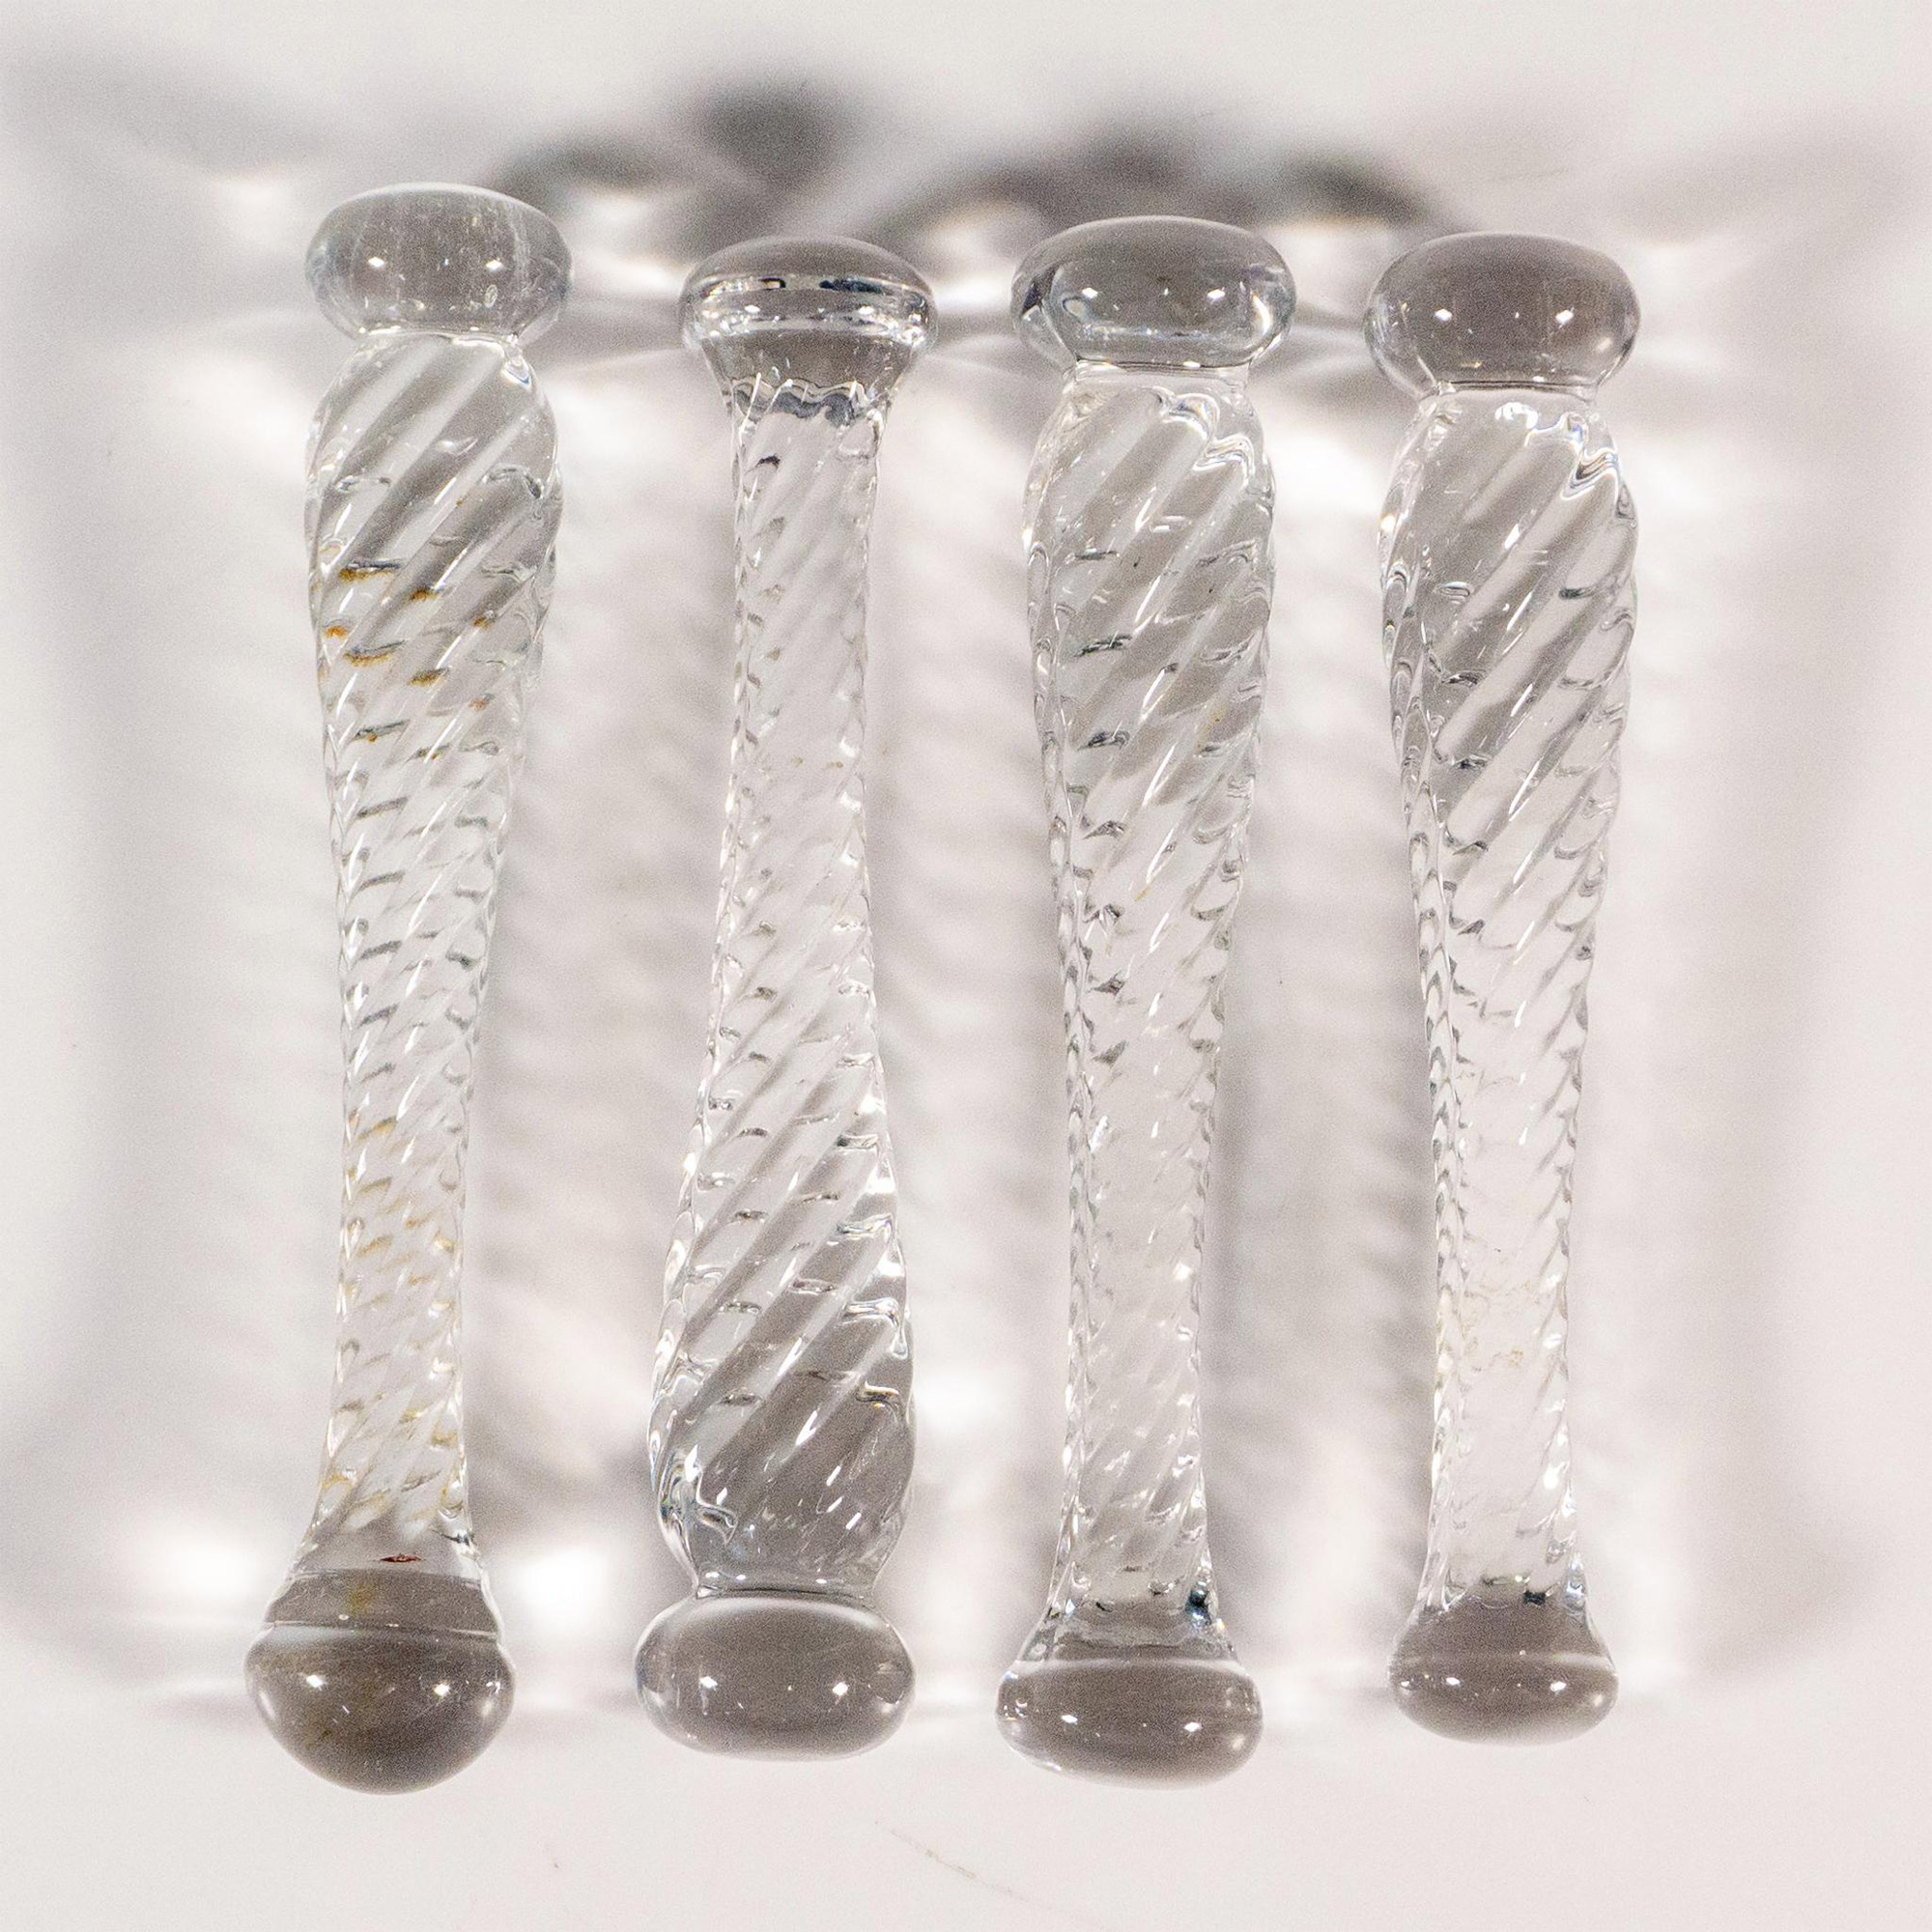 4pc Crystal Knife Rests, Pillars - Image 2 of 4